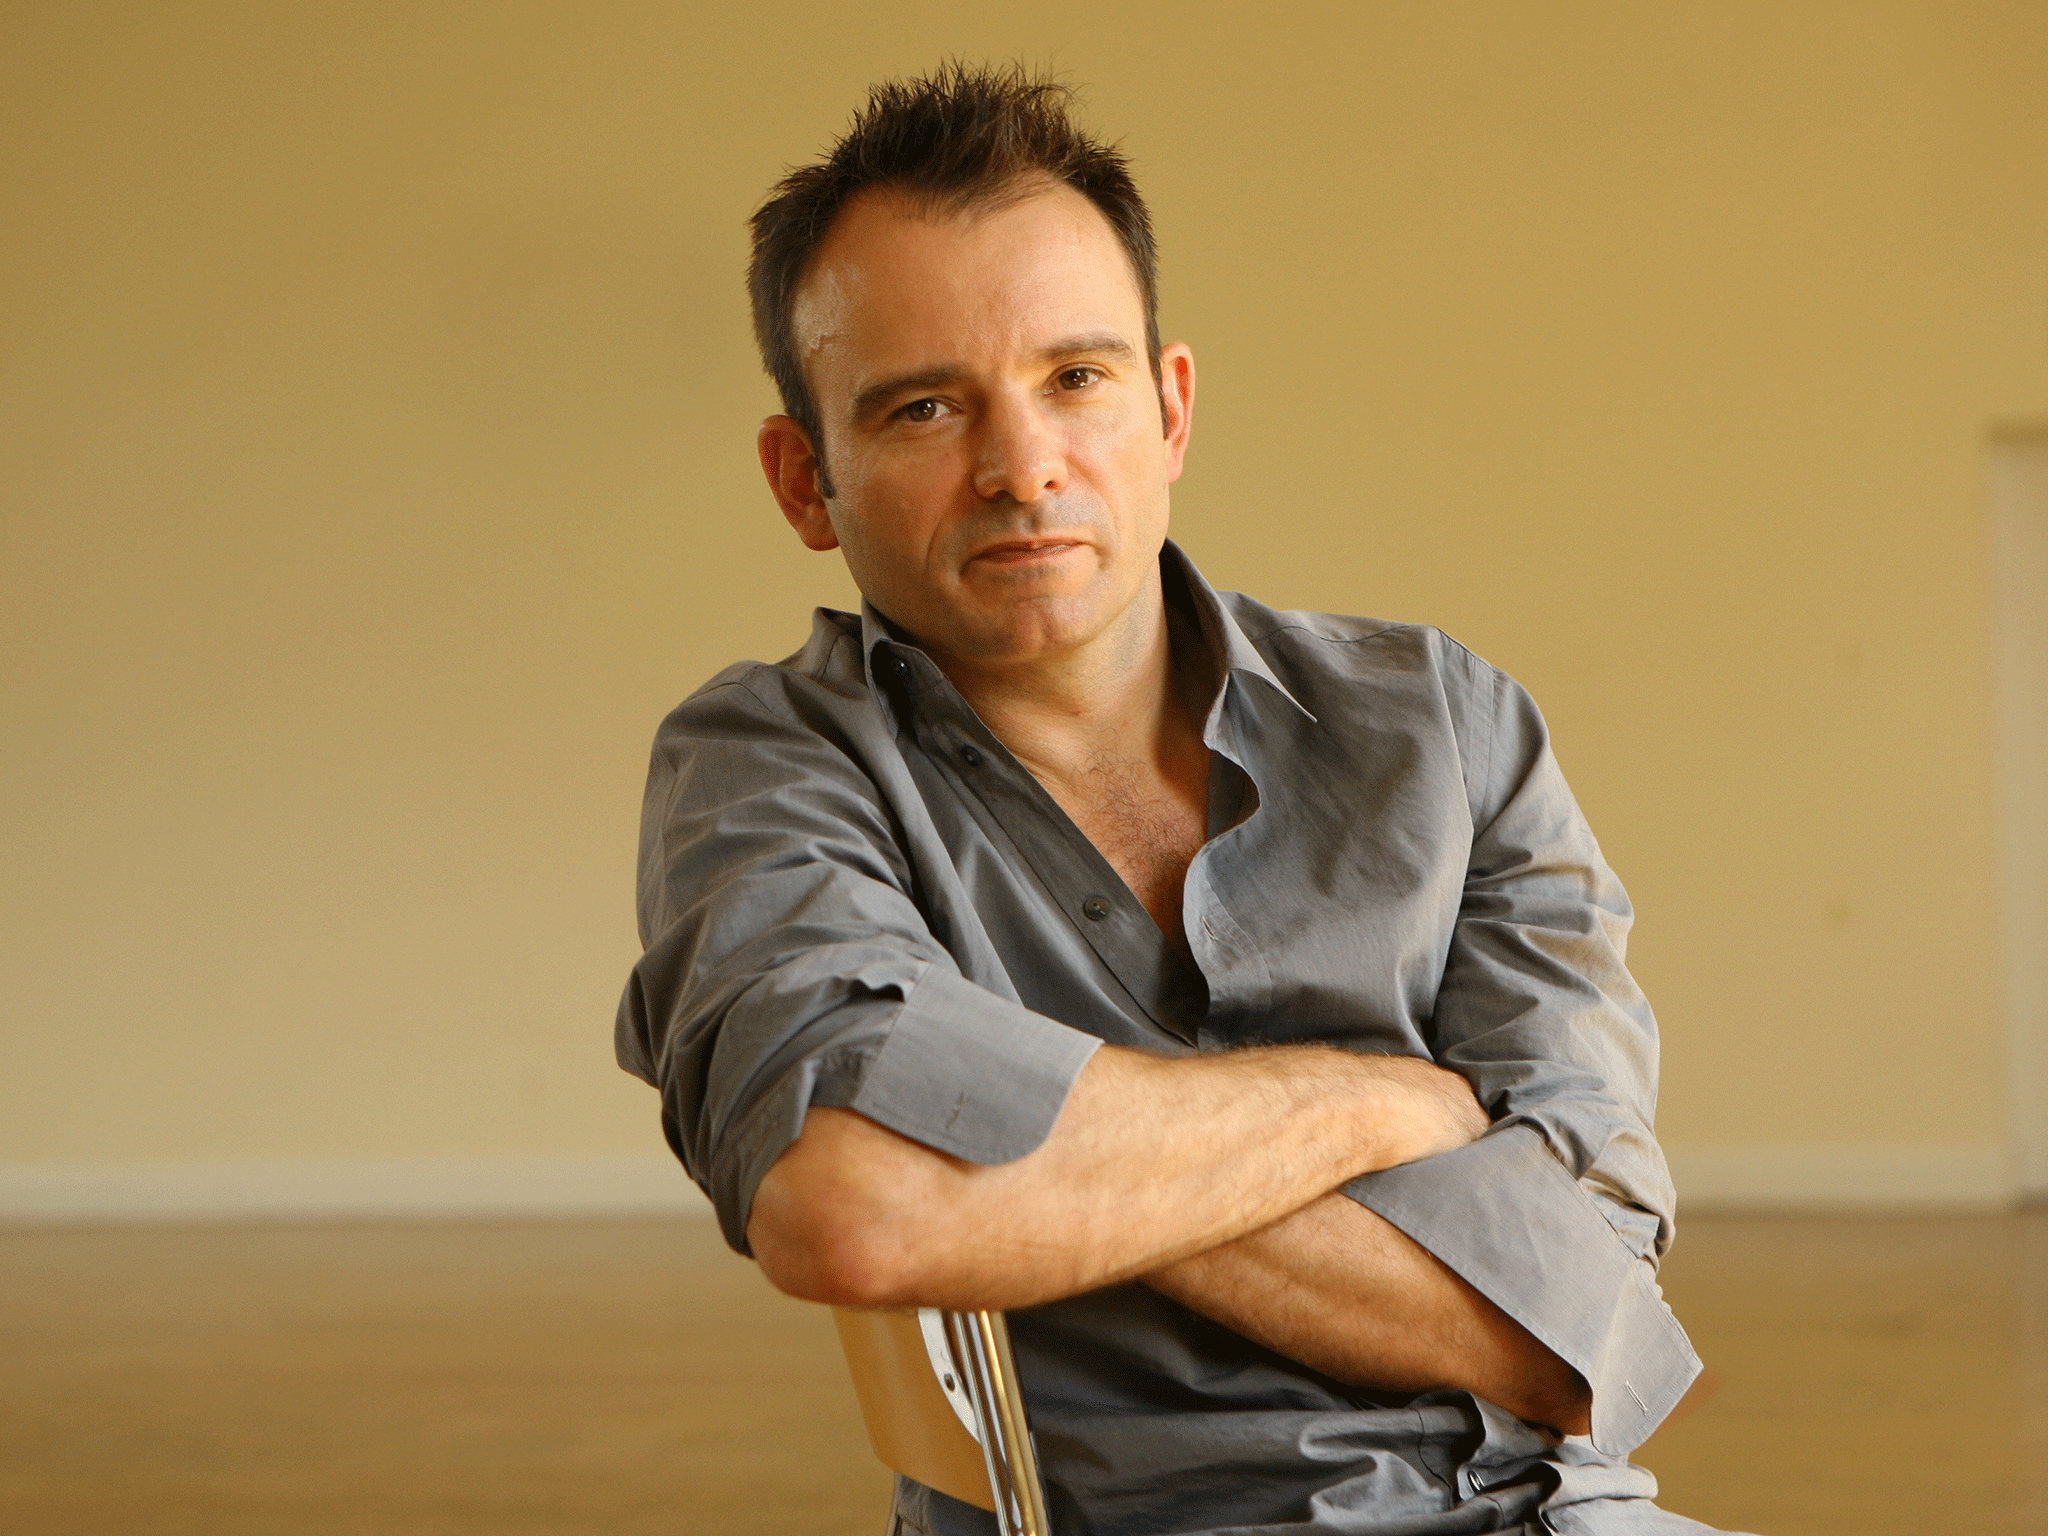 Matthew Warchus will take over from Kevin Spacey as artistic director of the Old Vic theatre in autumn 2015